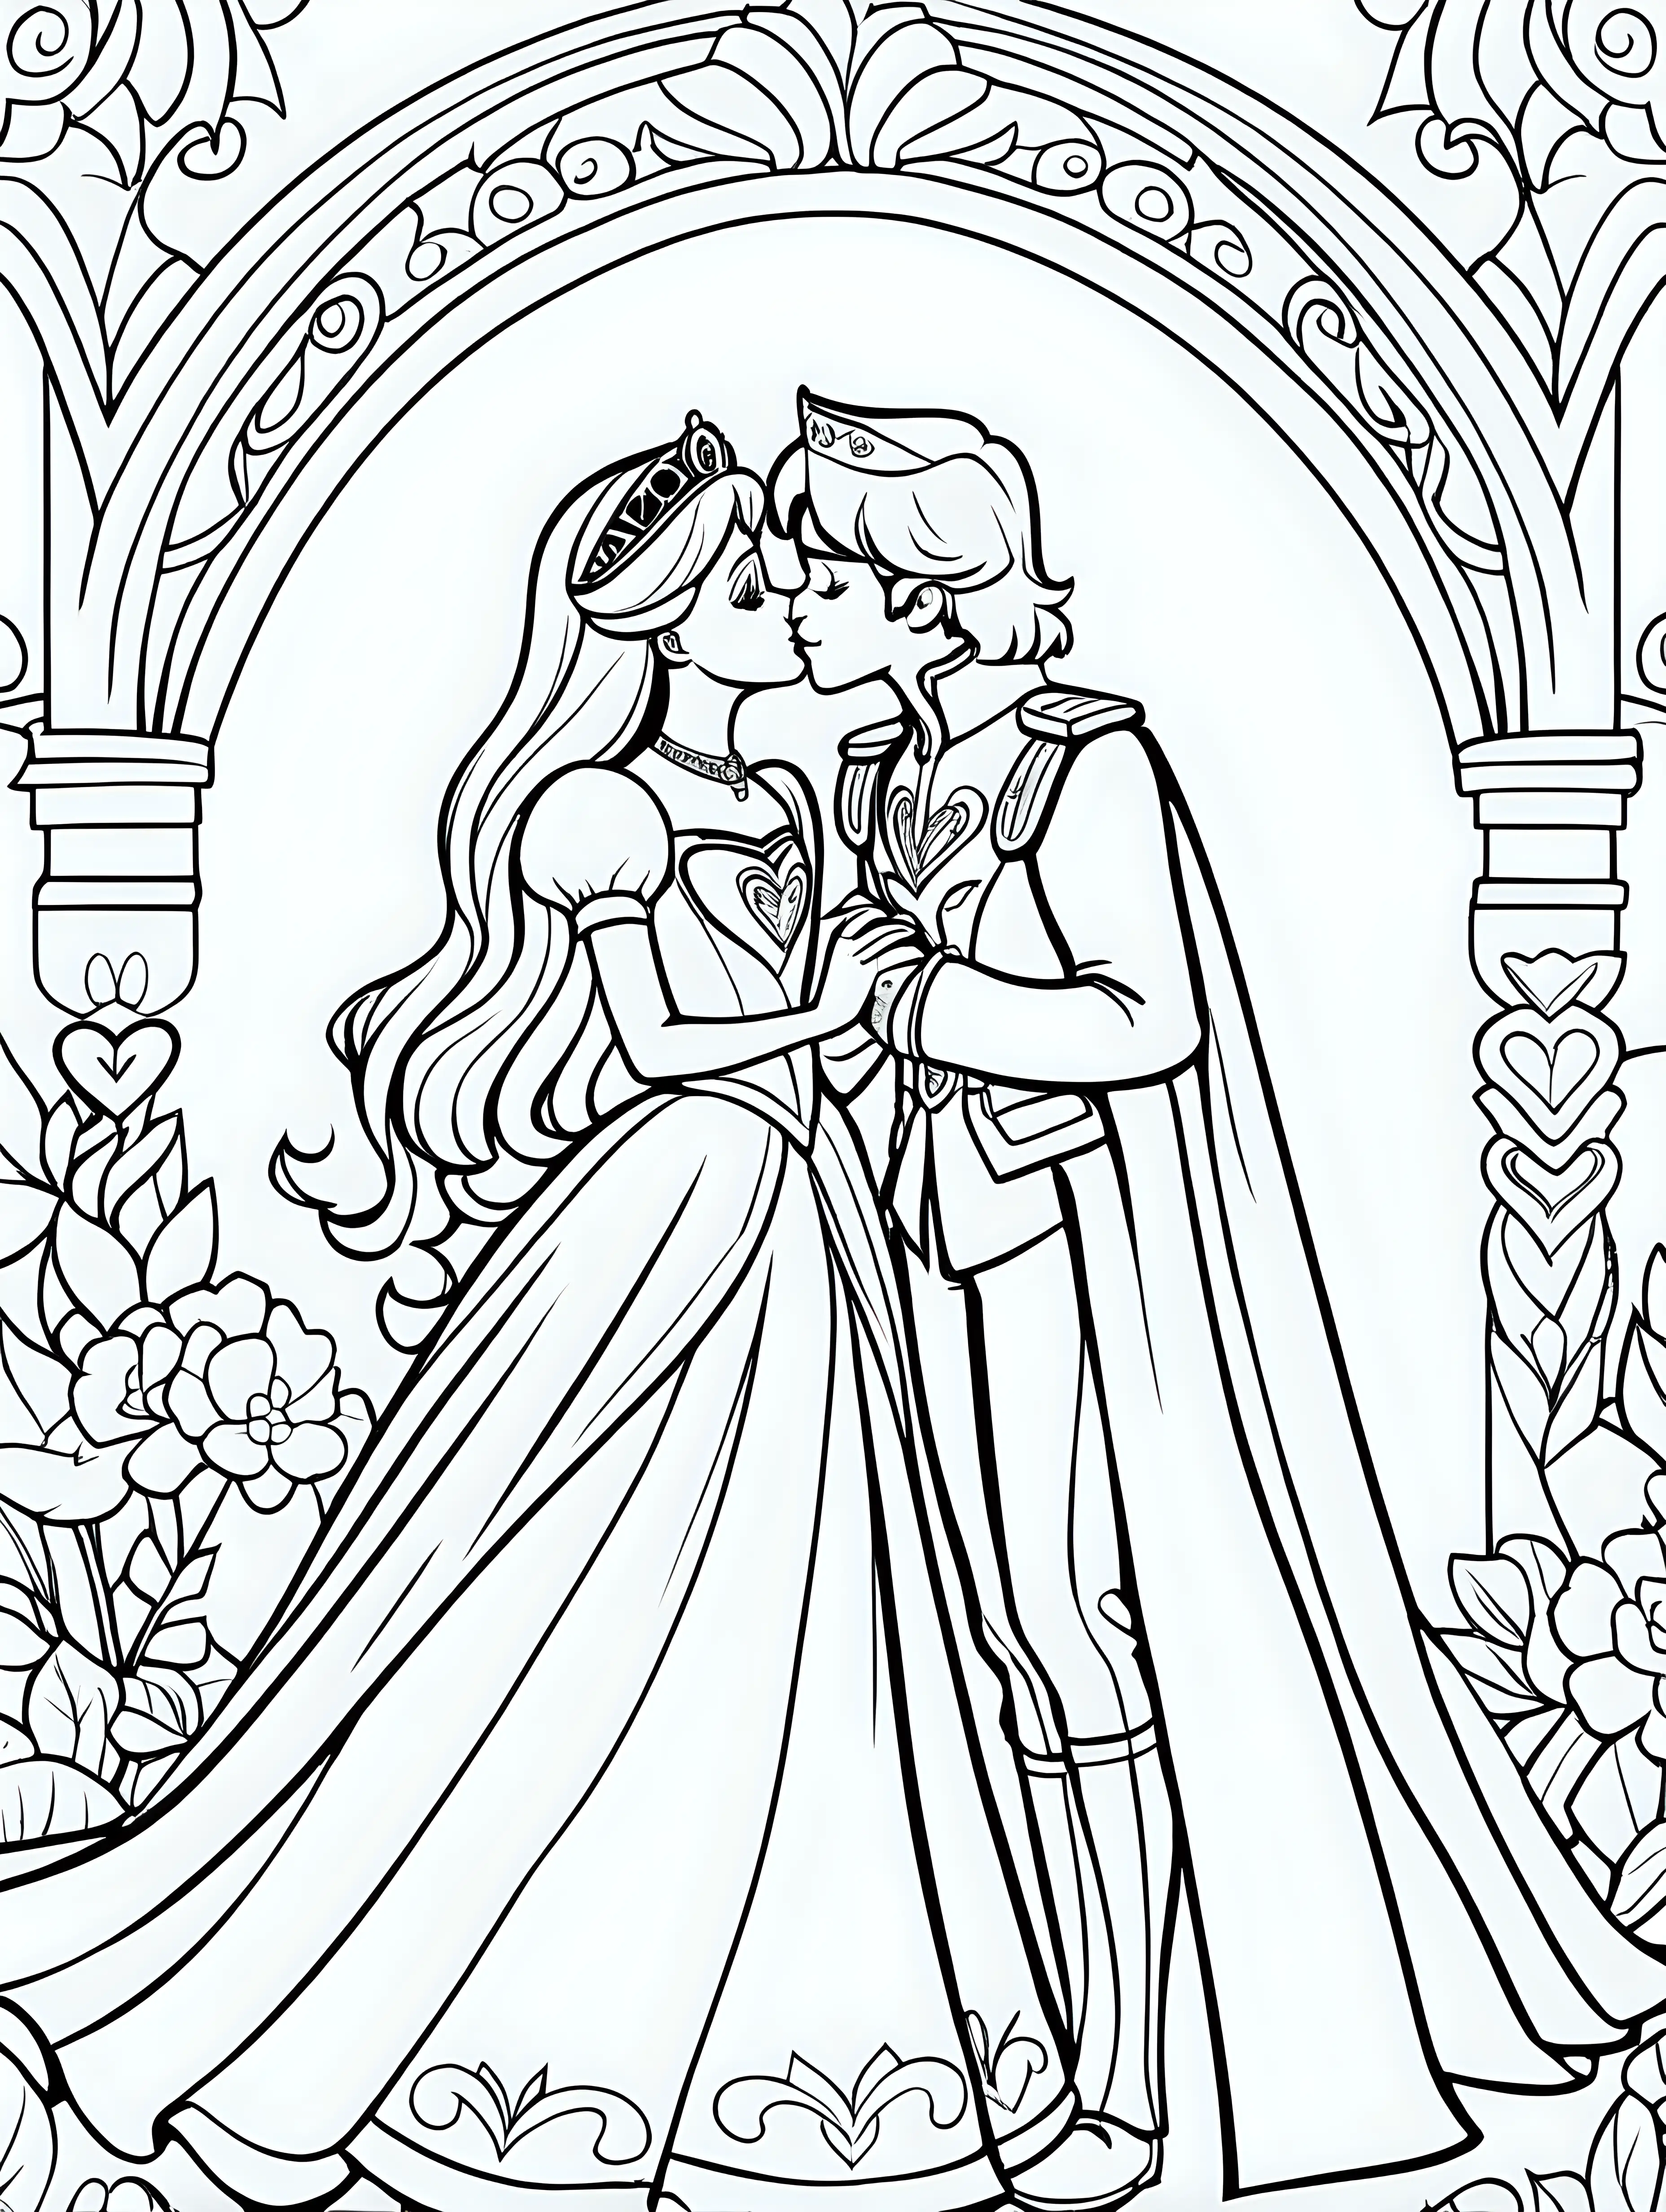 Adorable Prince and Princess Coloring Page with a Cute Kiss and Hearts